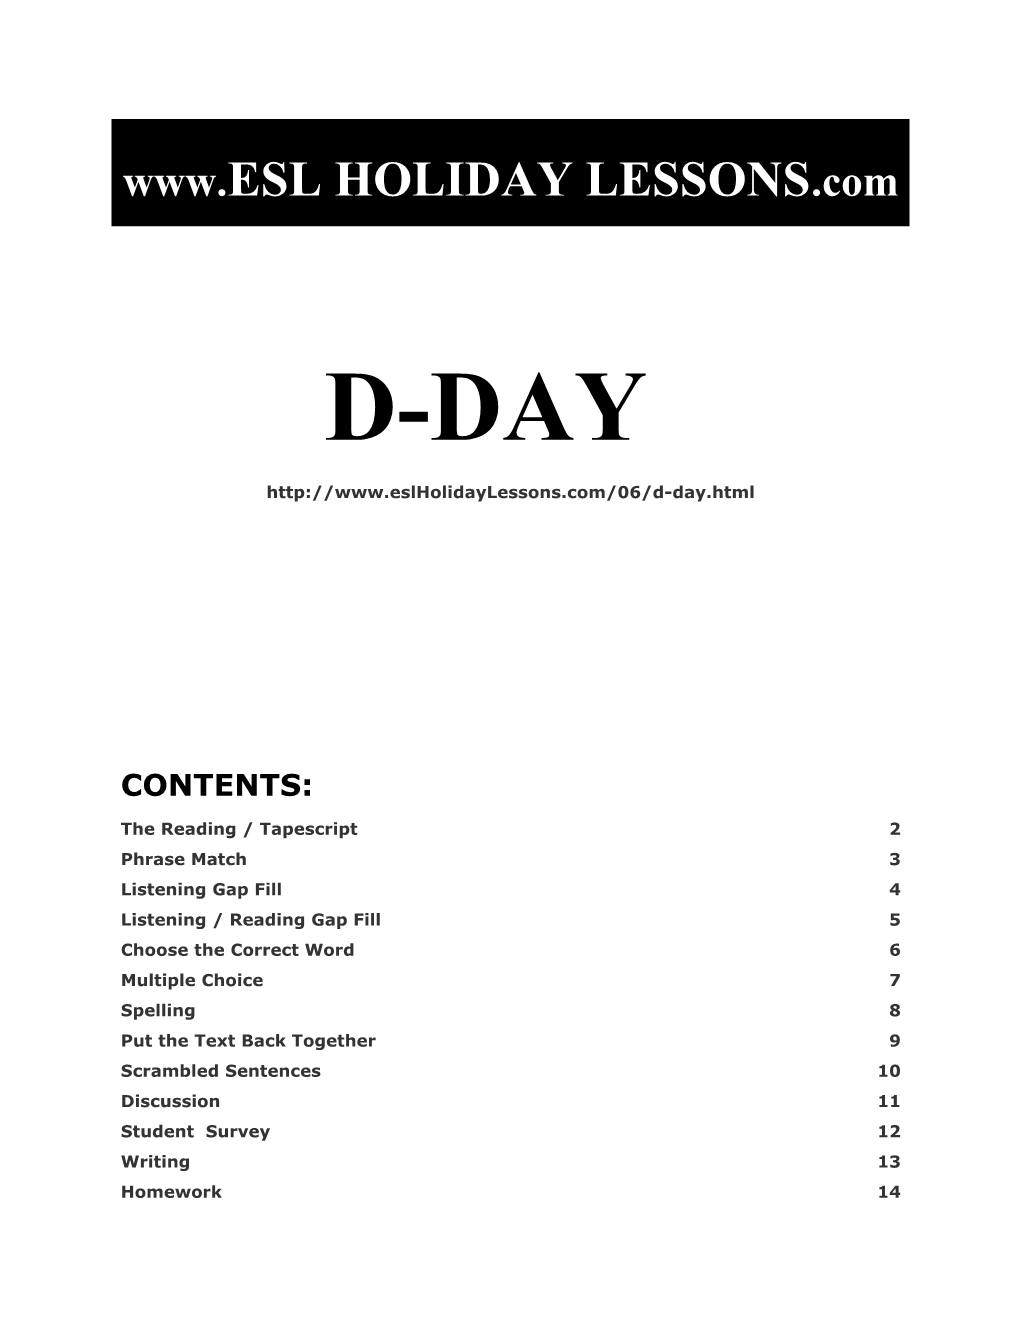 Holiday Lessons - D-Day